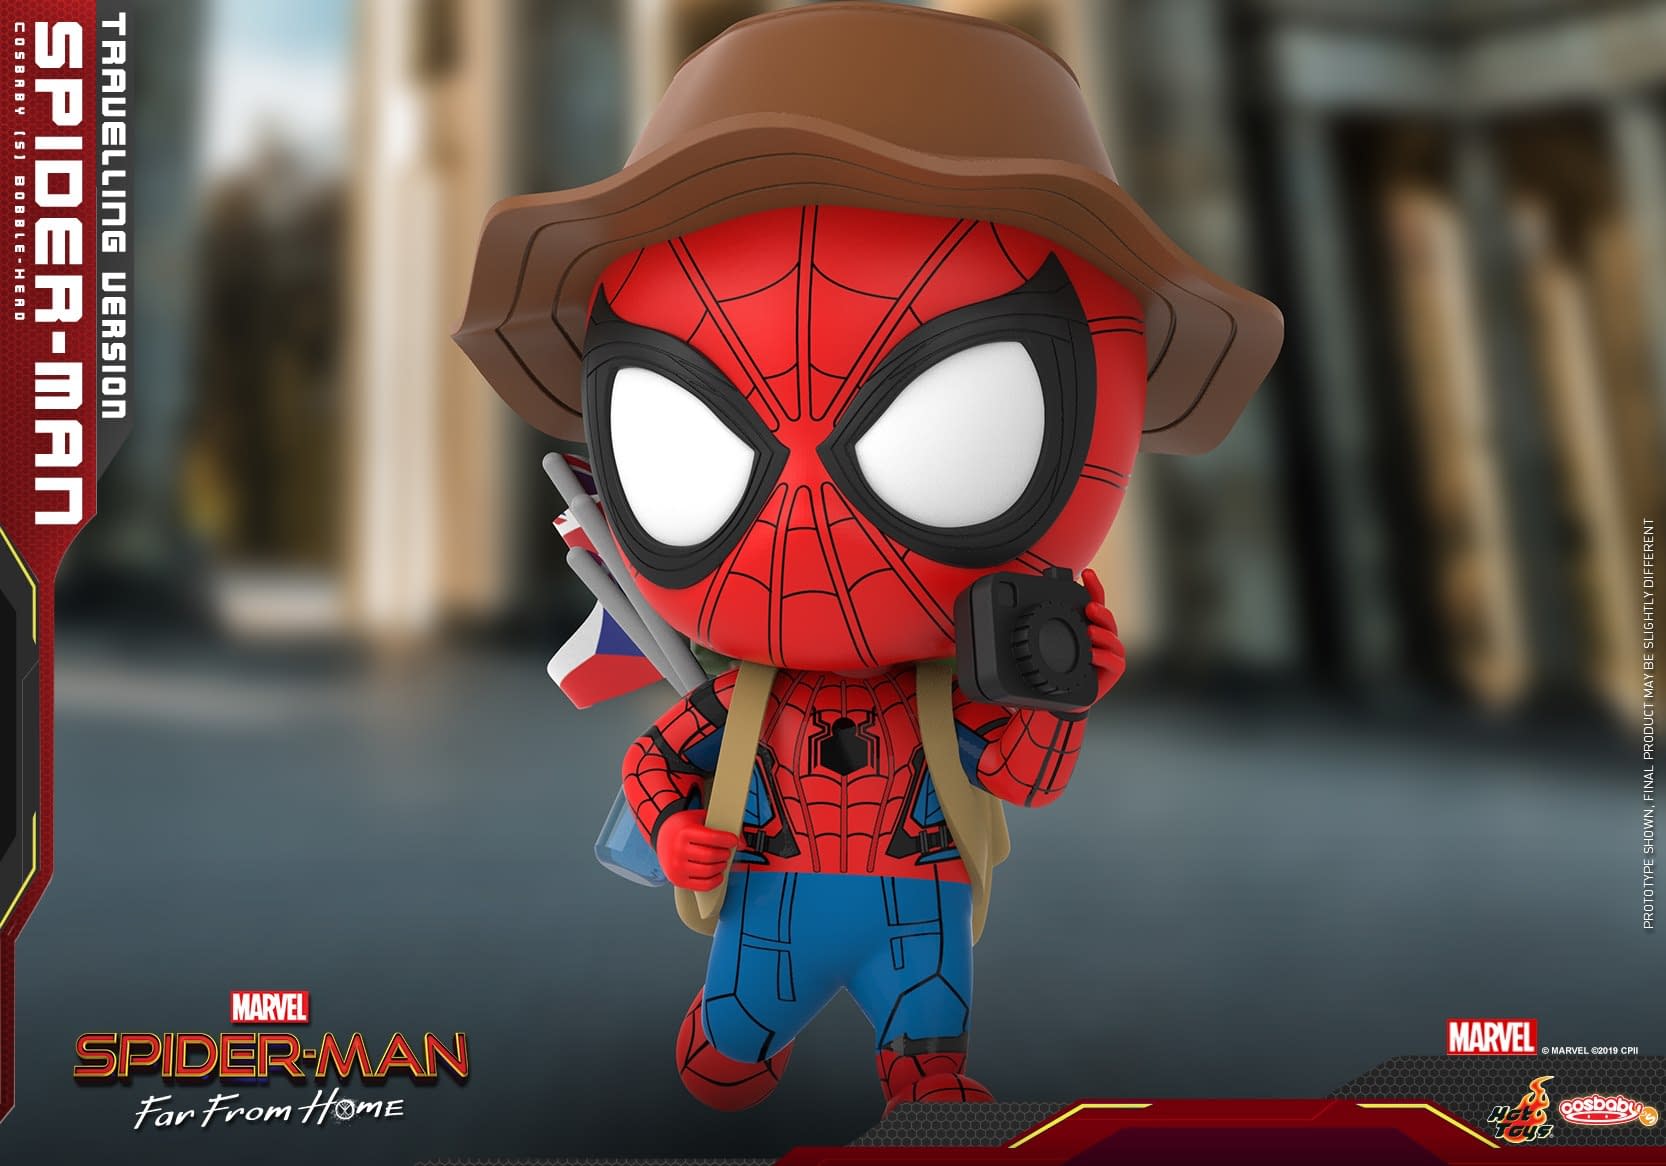 Stan Lee and Spider-Man Bobble-Heads Incoming from Hot Toys